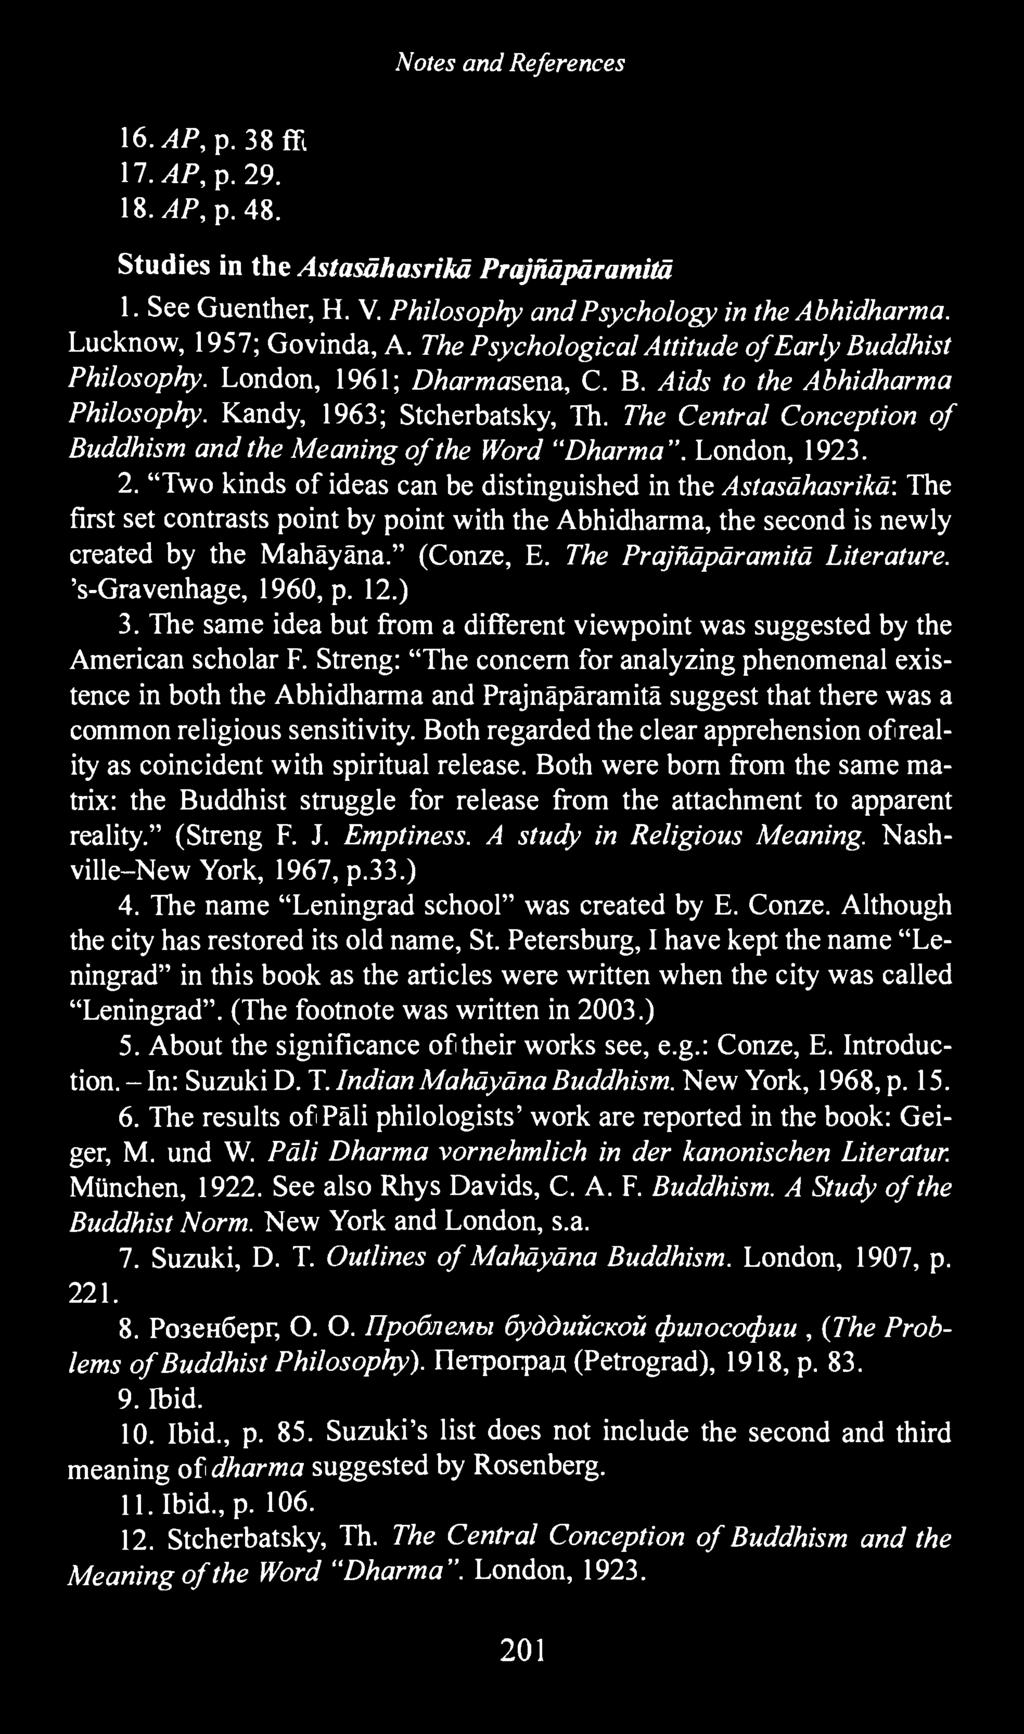 The Central Conception of Buddhism and the Meaning of the Word "Dharma". London, 1923. 2.